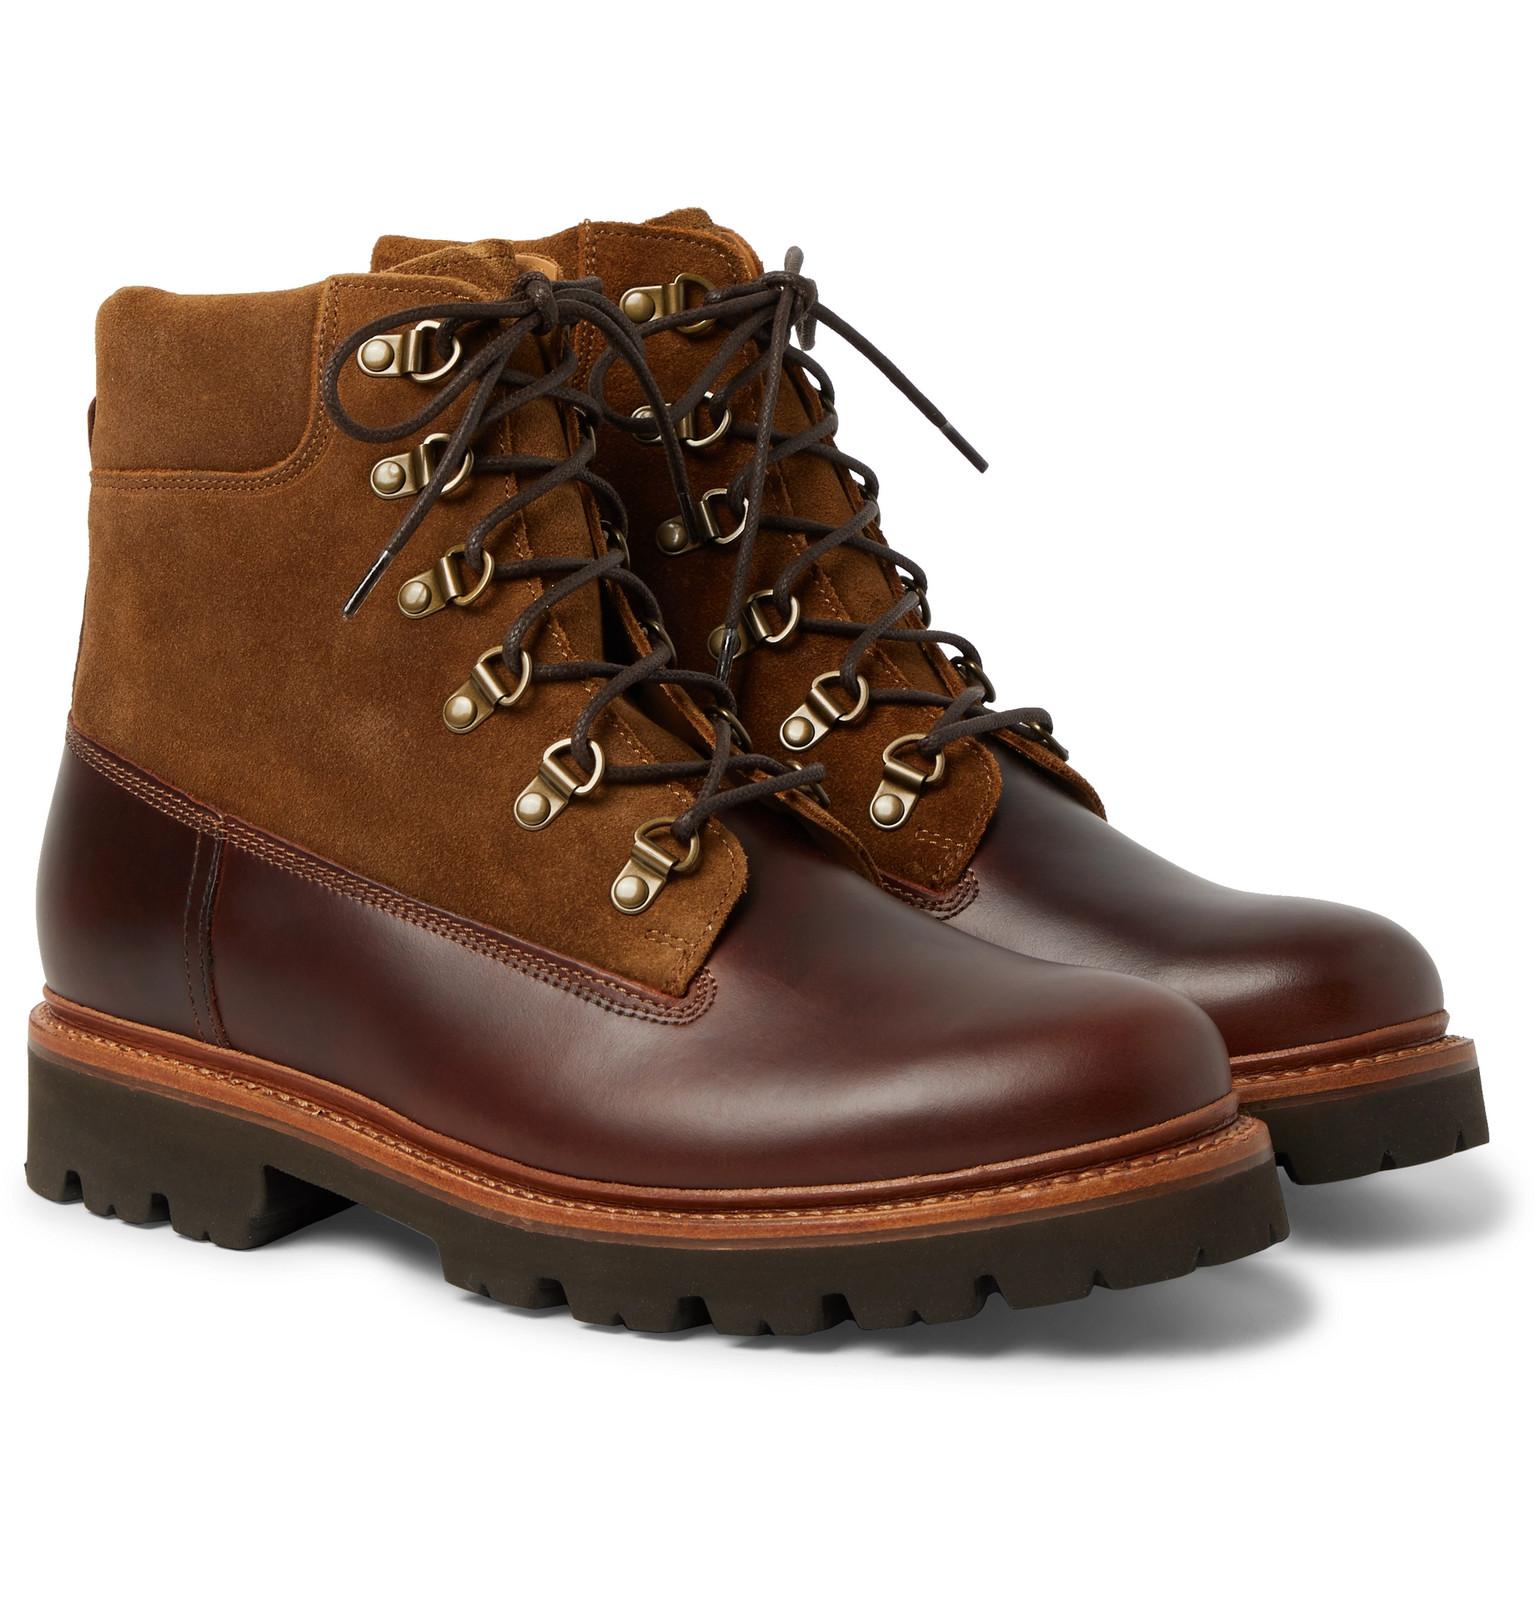 Grenson Rutherford Leather And Suede Boots in Brown for Men - Lyst